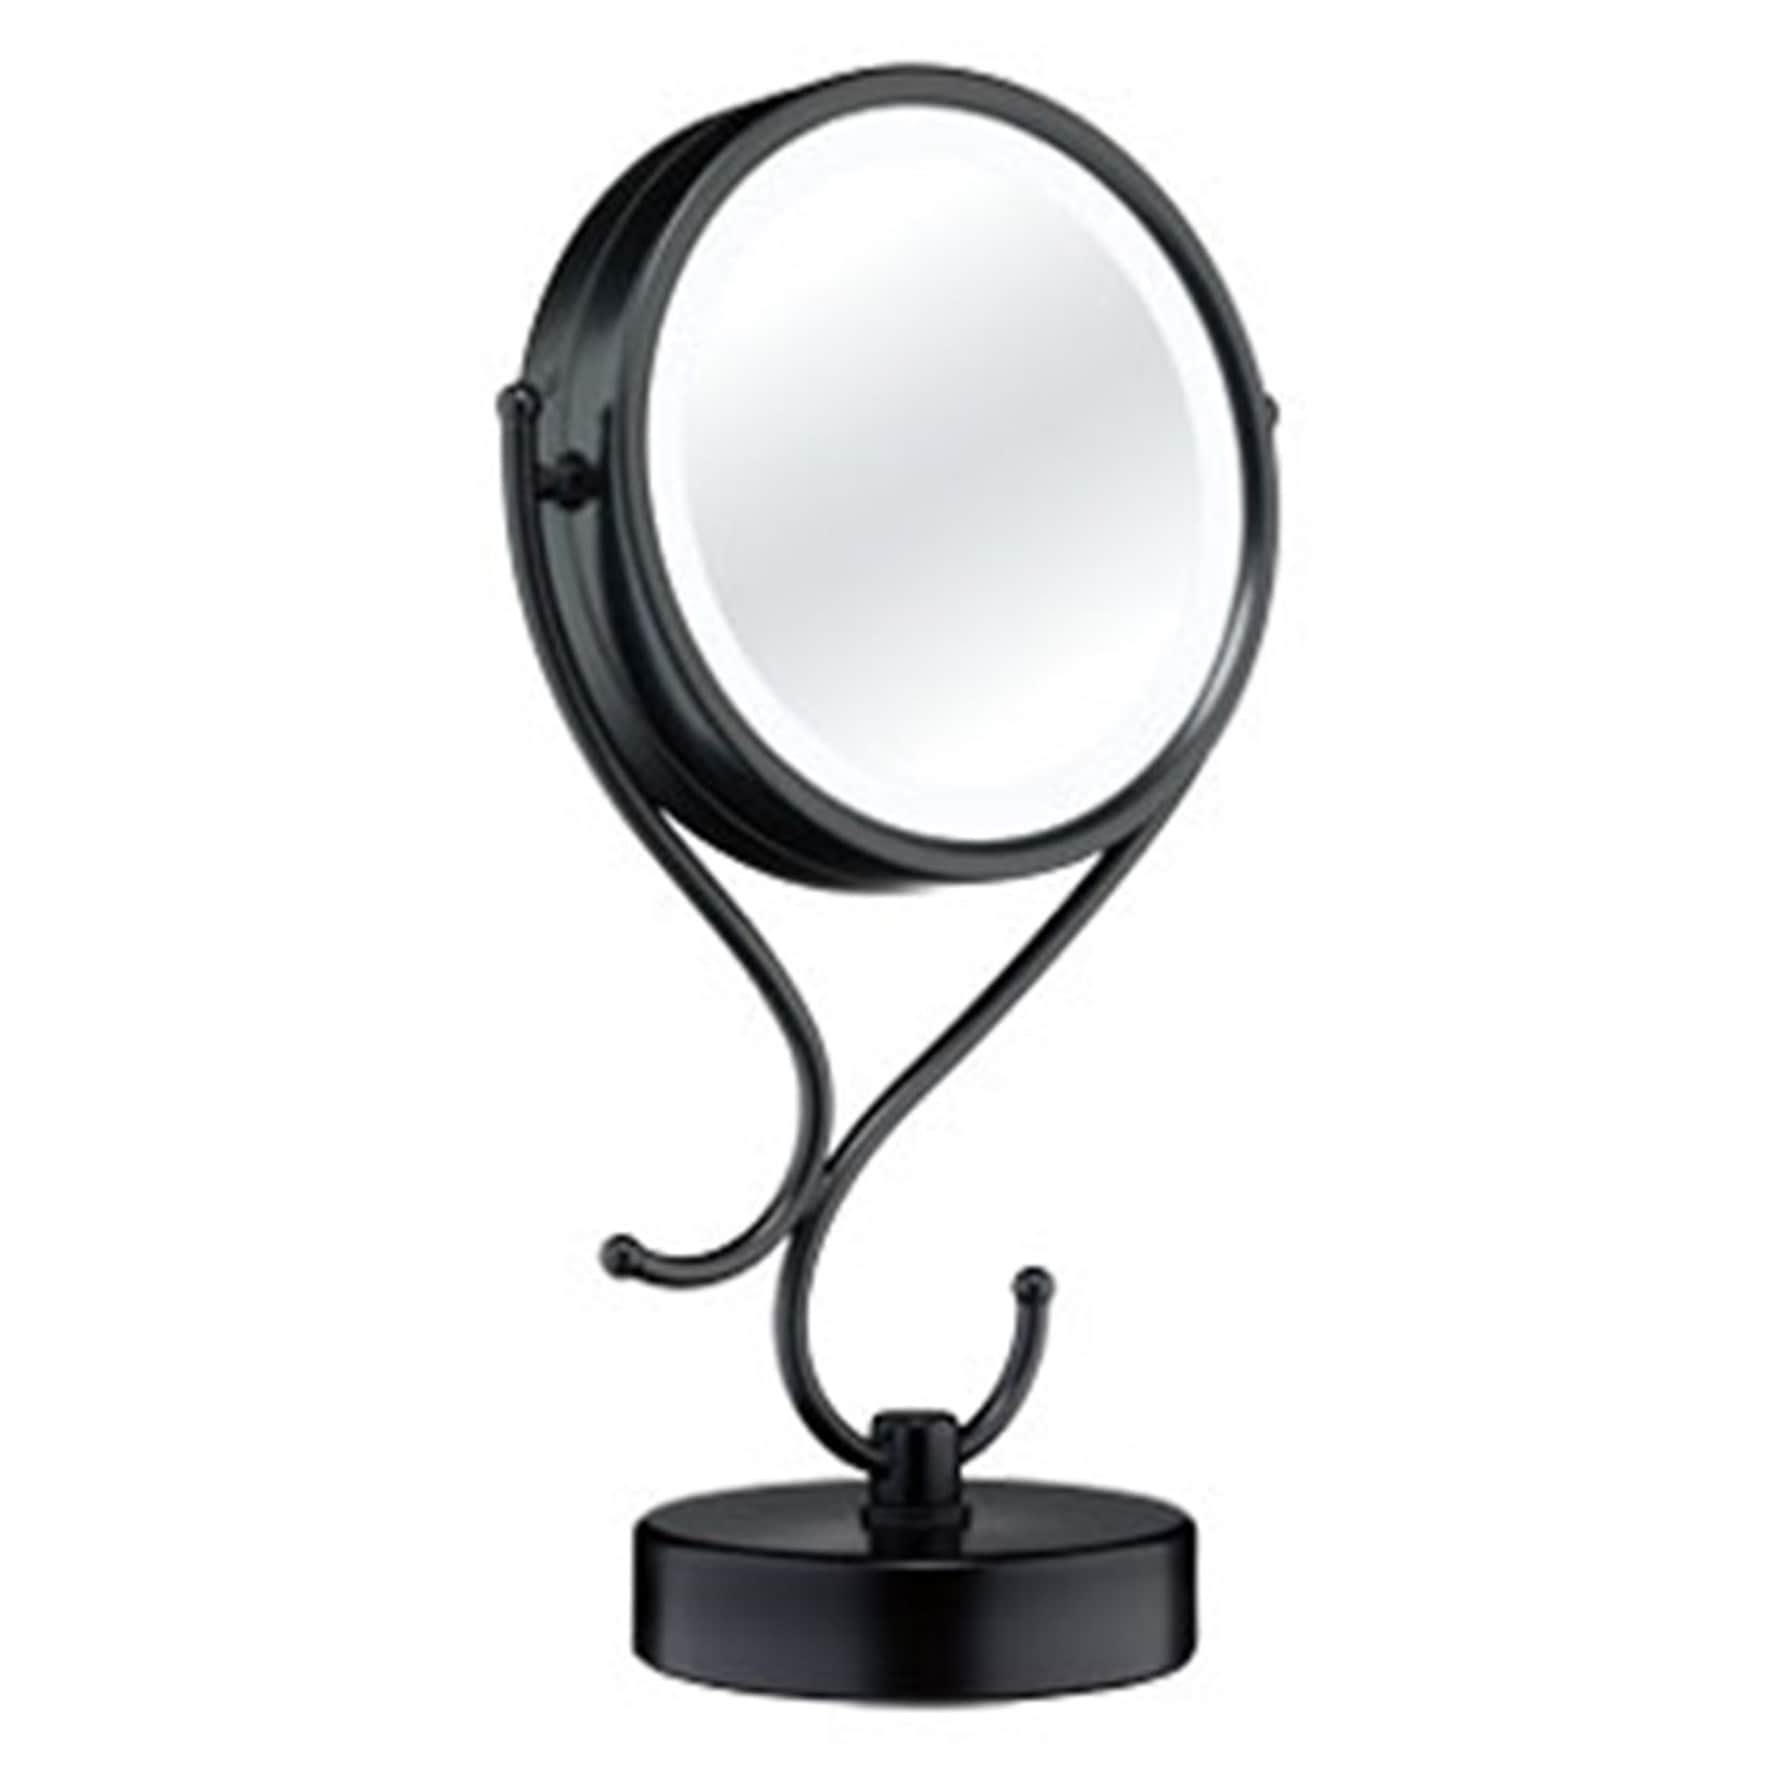 Light In The Makeup Mirrors, How To Change Bulb In Conair Mirror